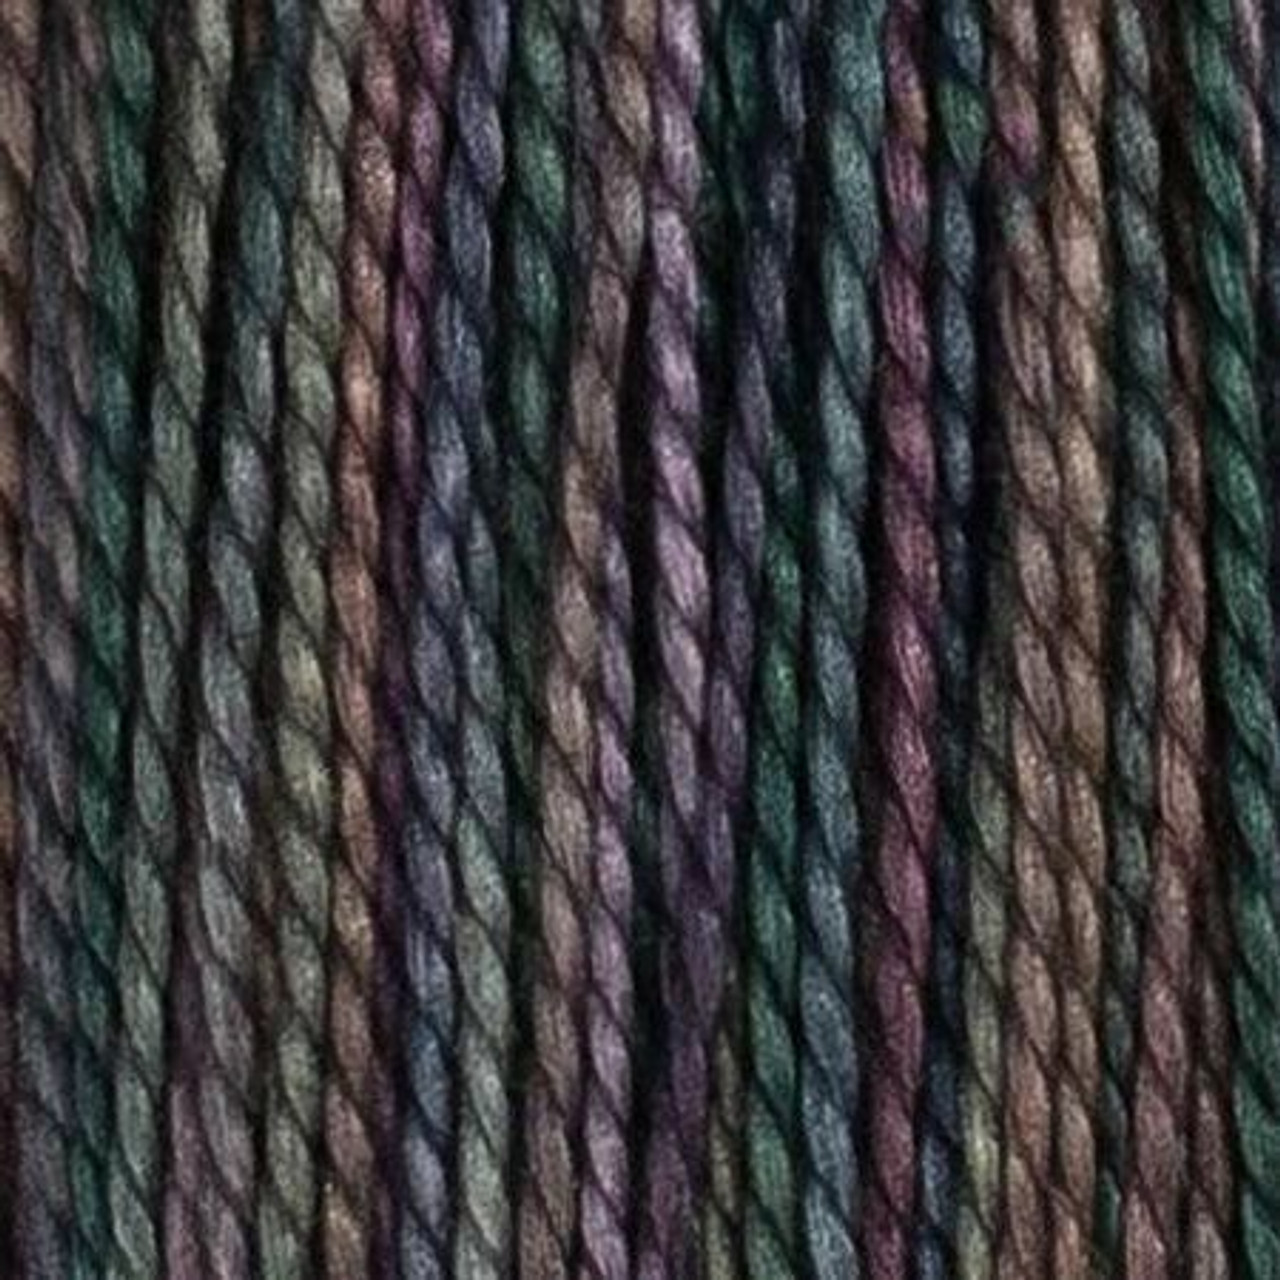 House of Embroidery : 8wt Perle Cotton - Reflections (88B)